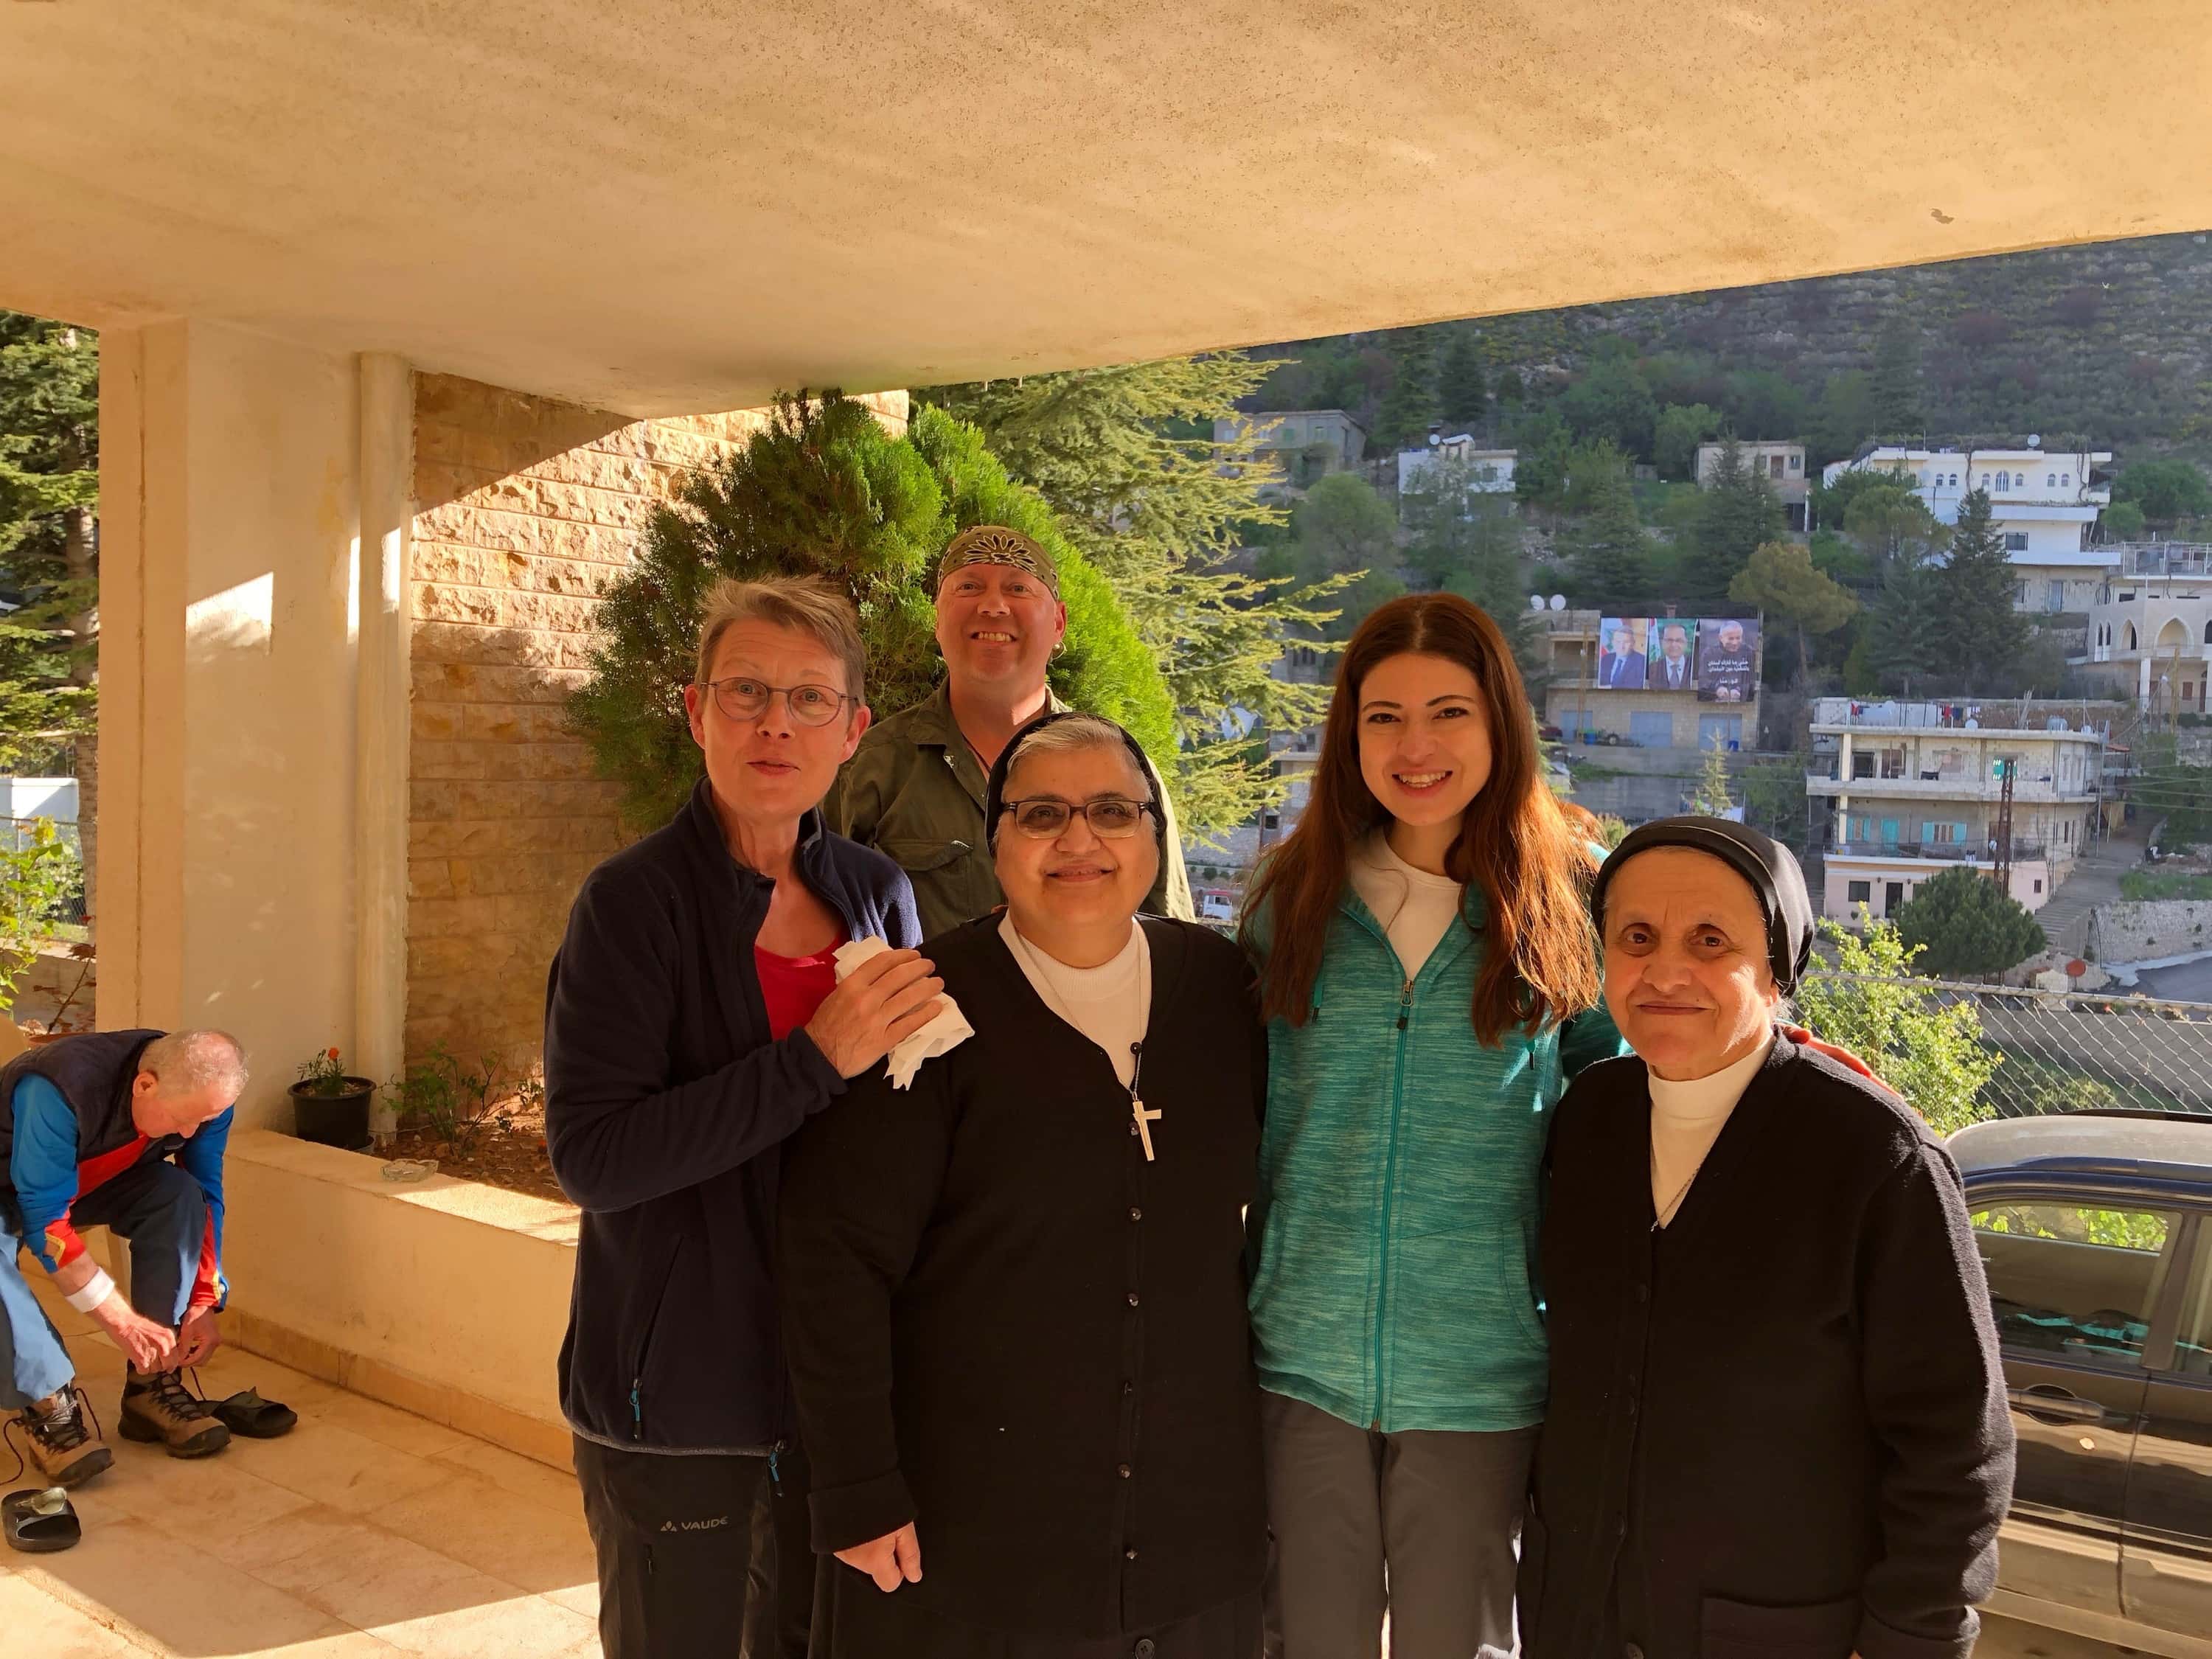 Trail-Side Stories – Sister Madonna from El Aaqoura has something to share!